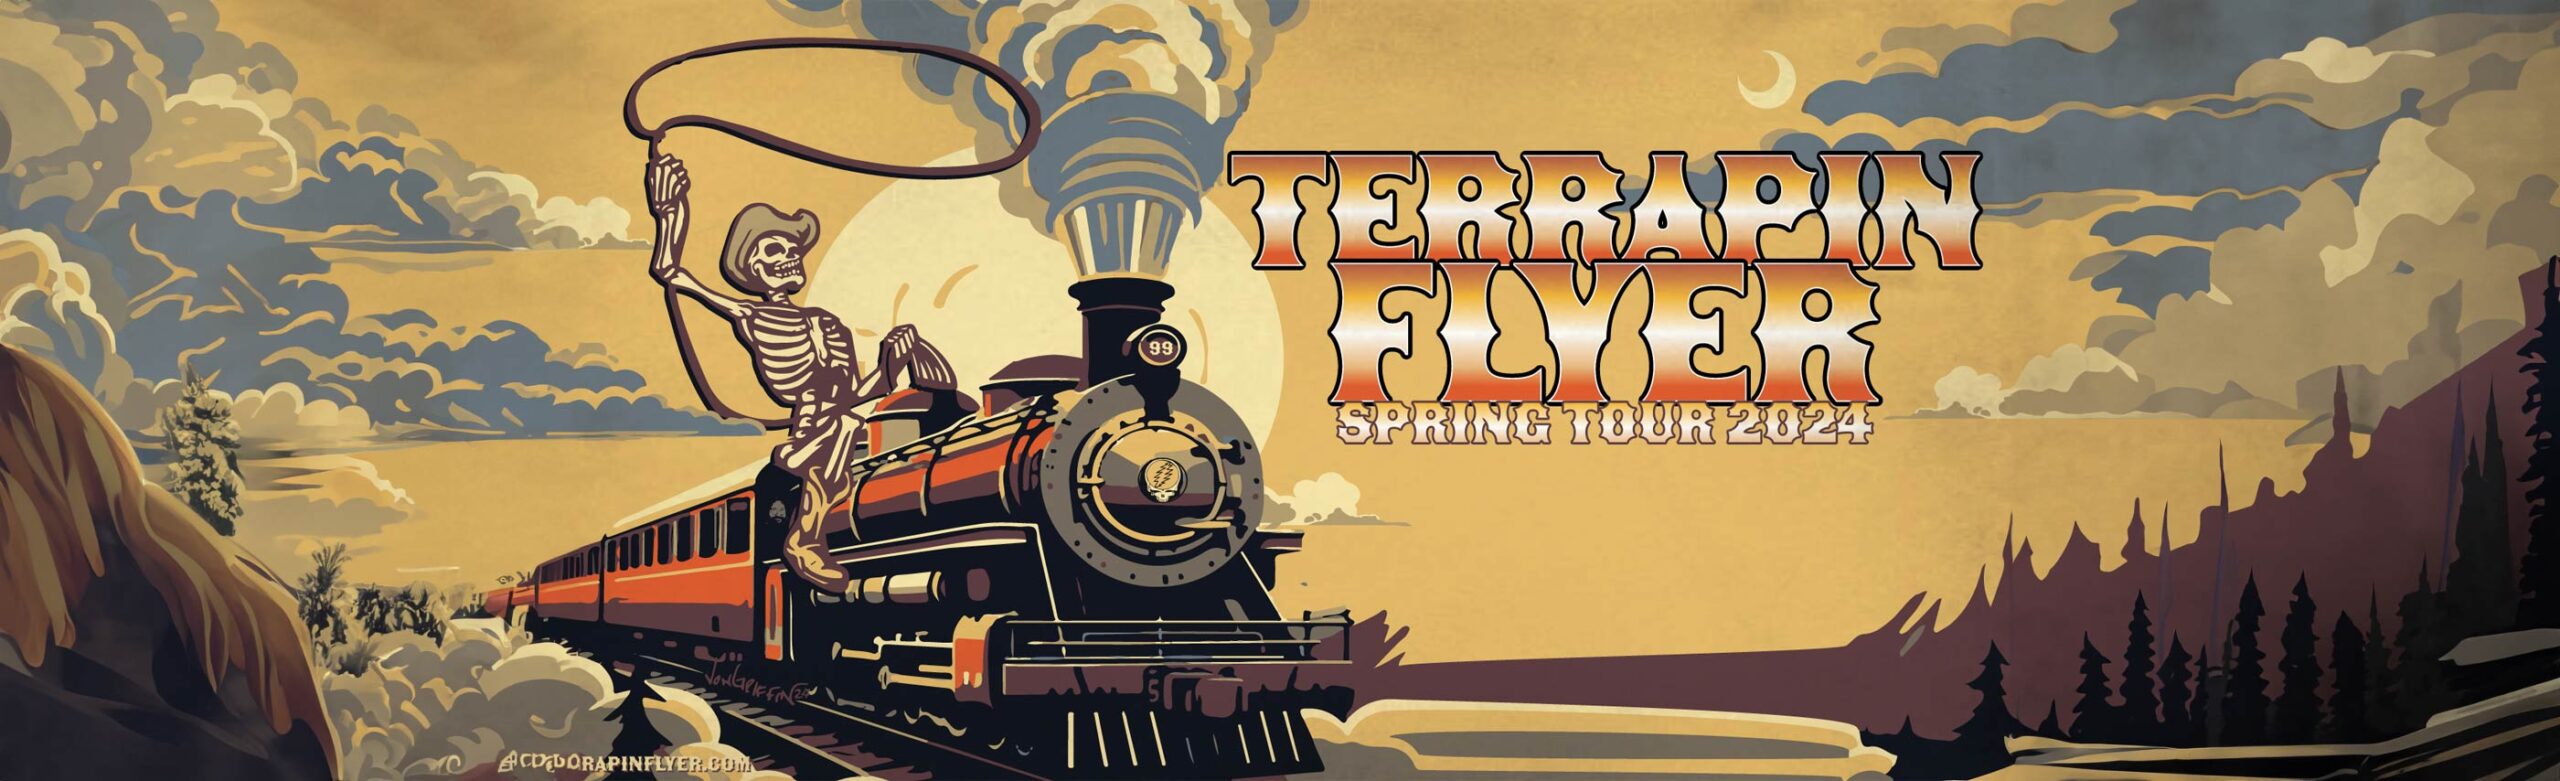 Terrapin Flyer Confirm Concerts at The Wilma and ELM for Spring 2024 Image